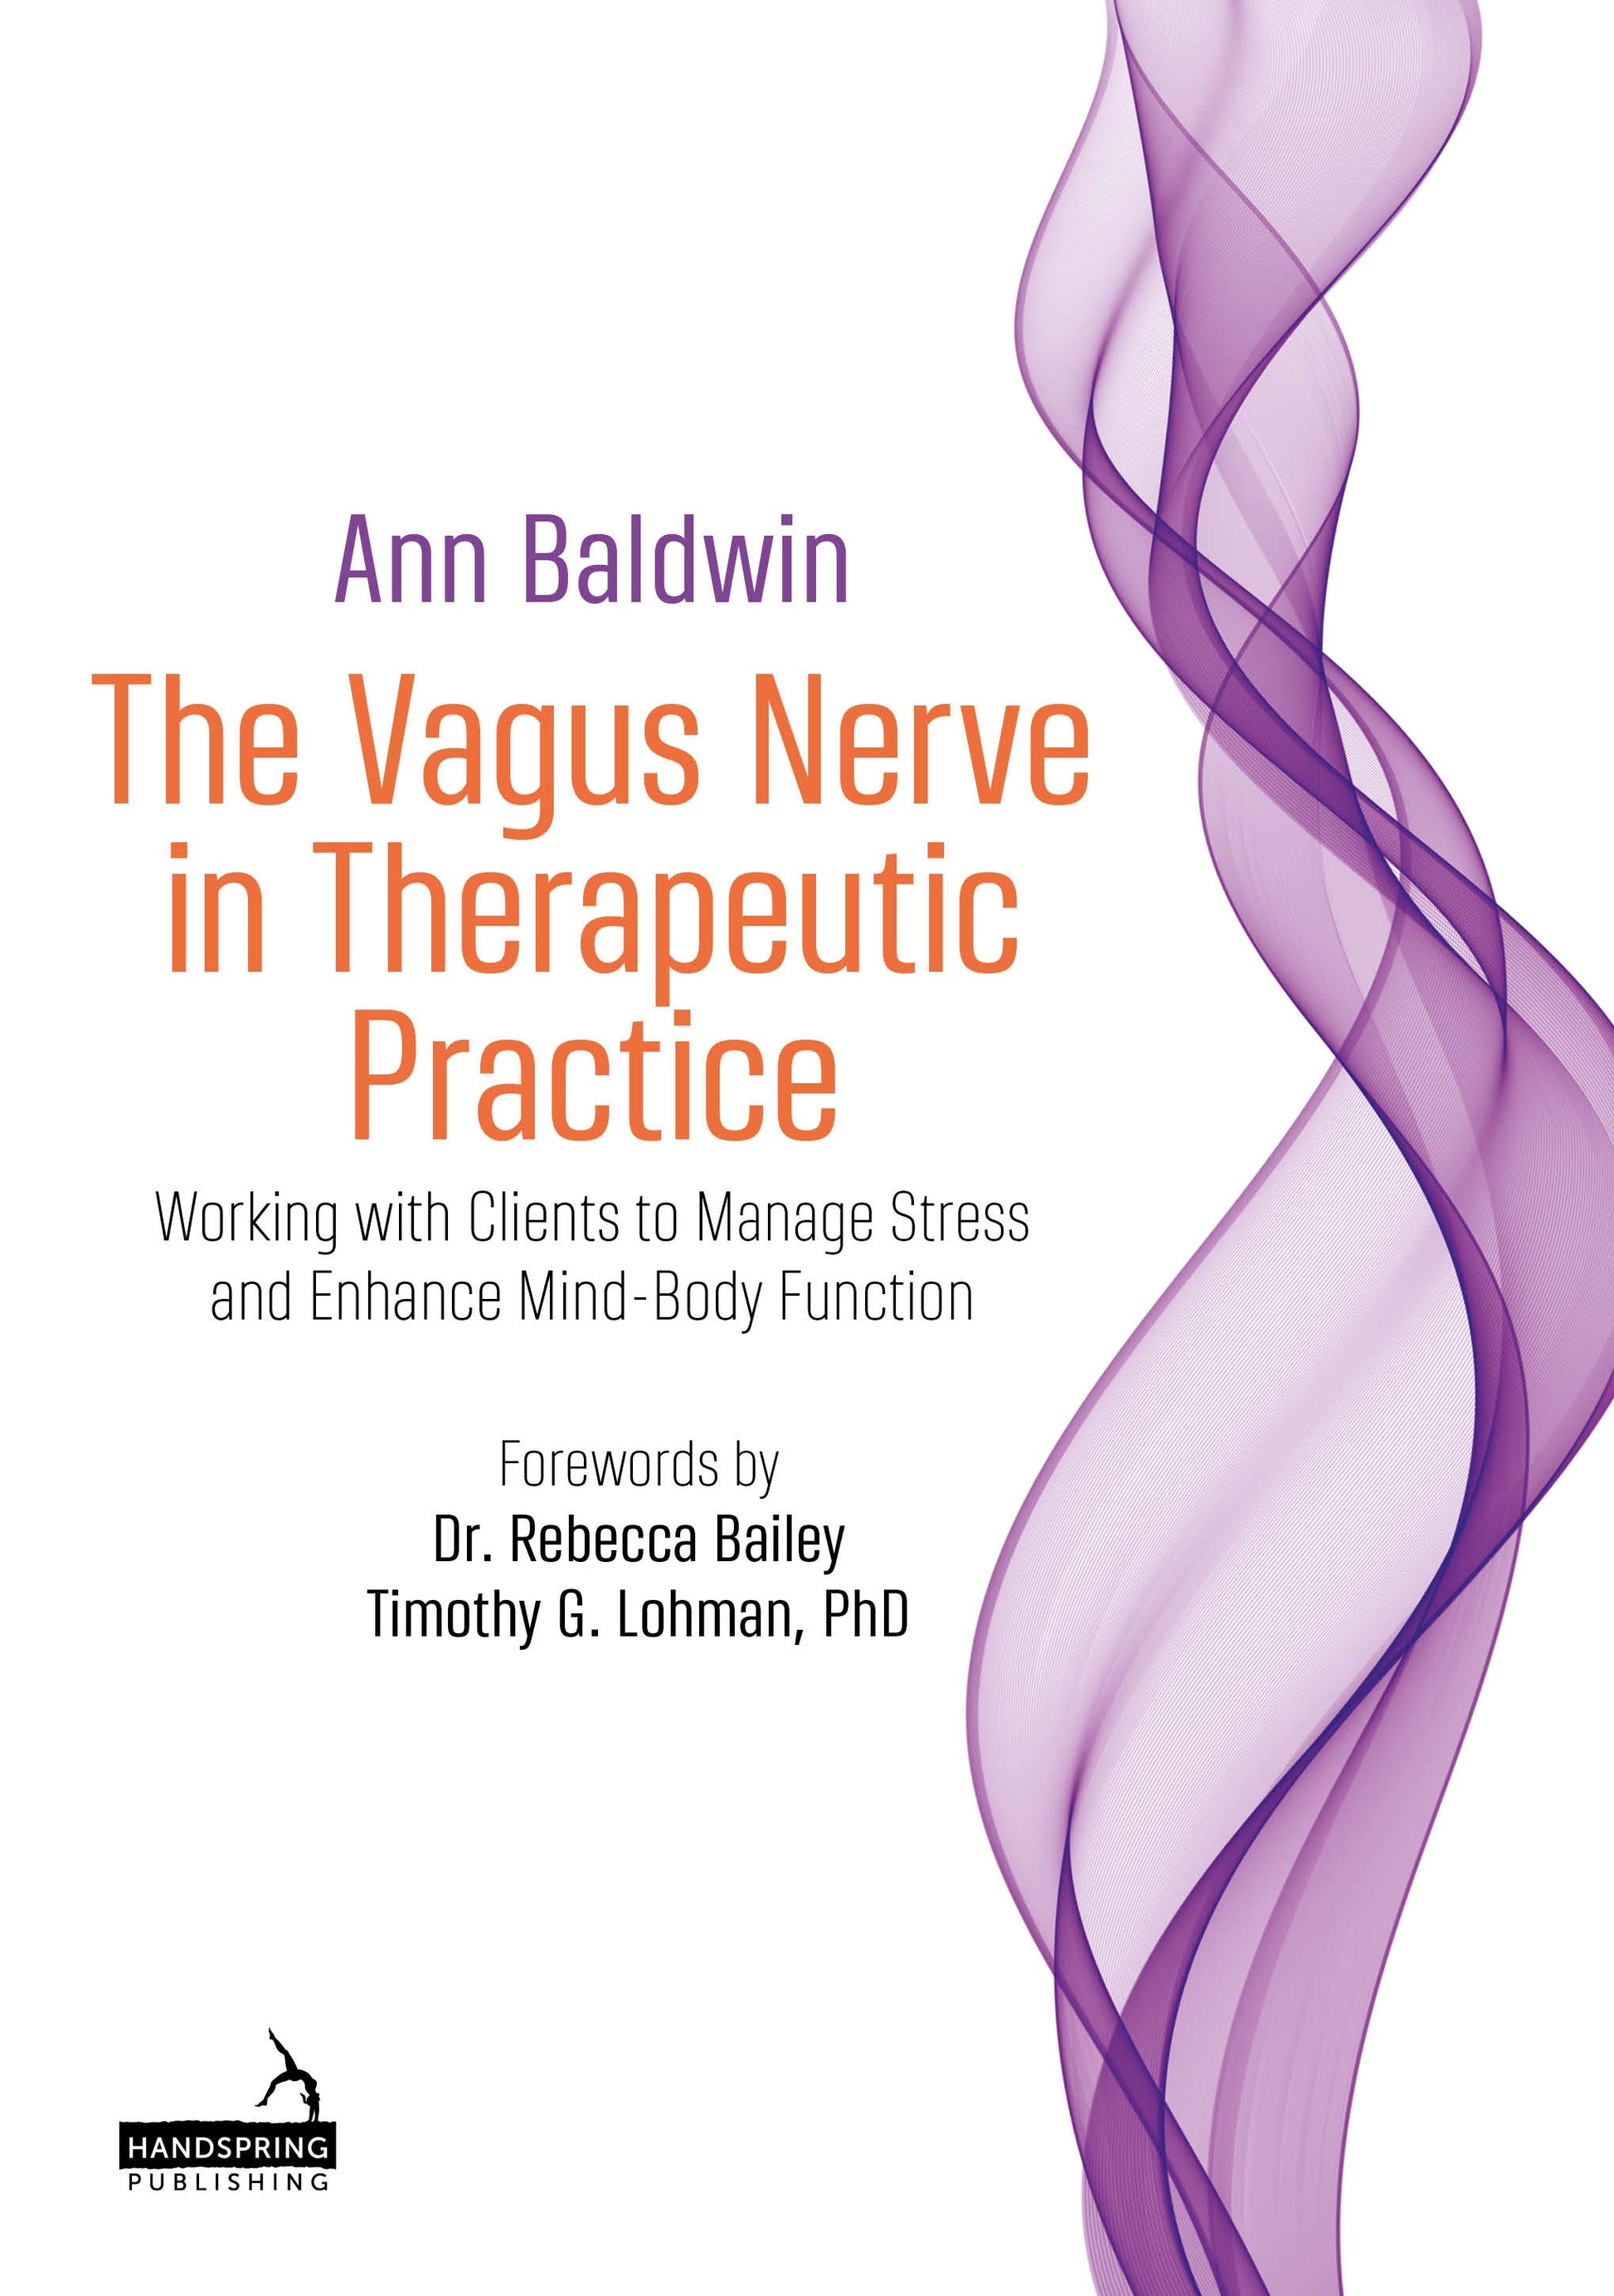 The Vagus Nerve in Therapeutic Practice by Rebecca Bailey, Timothy Lohman, Ann Baldwin